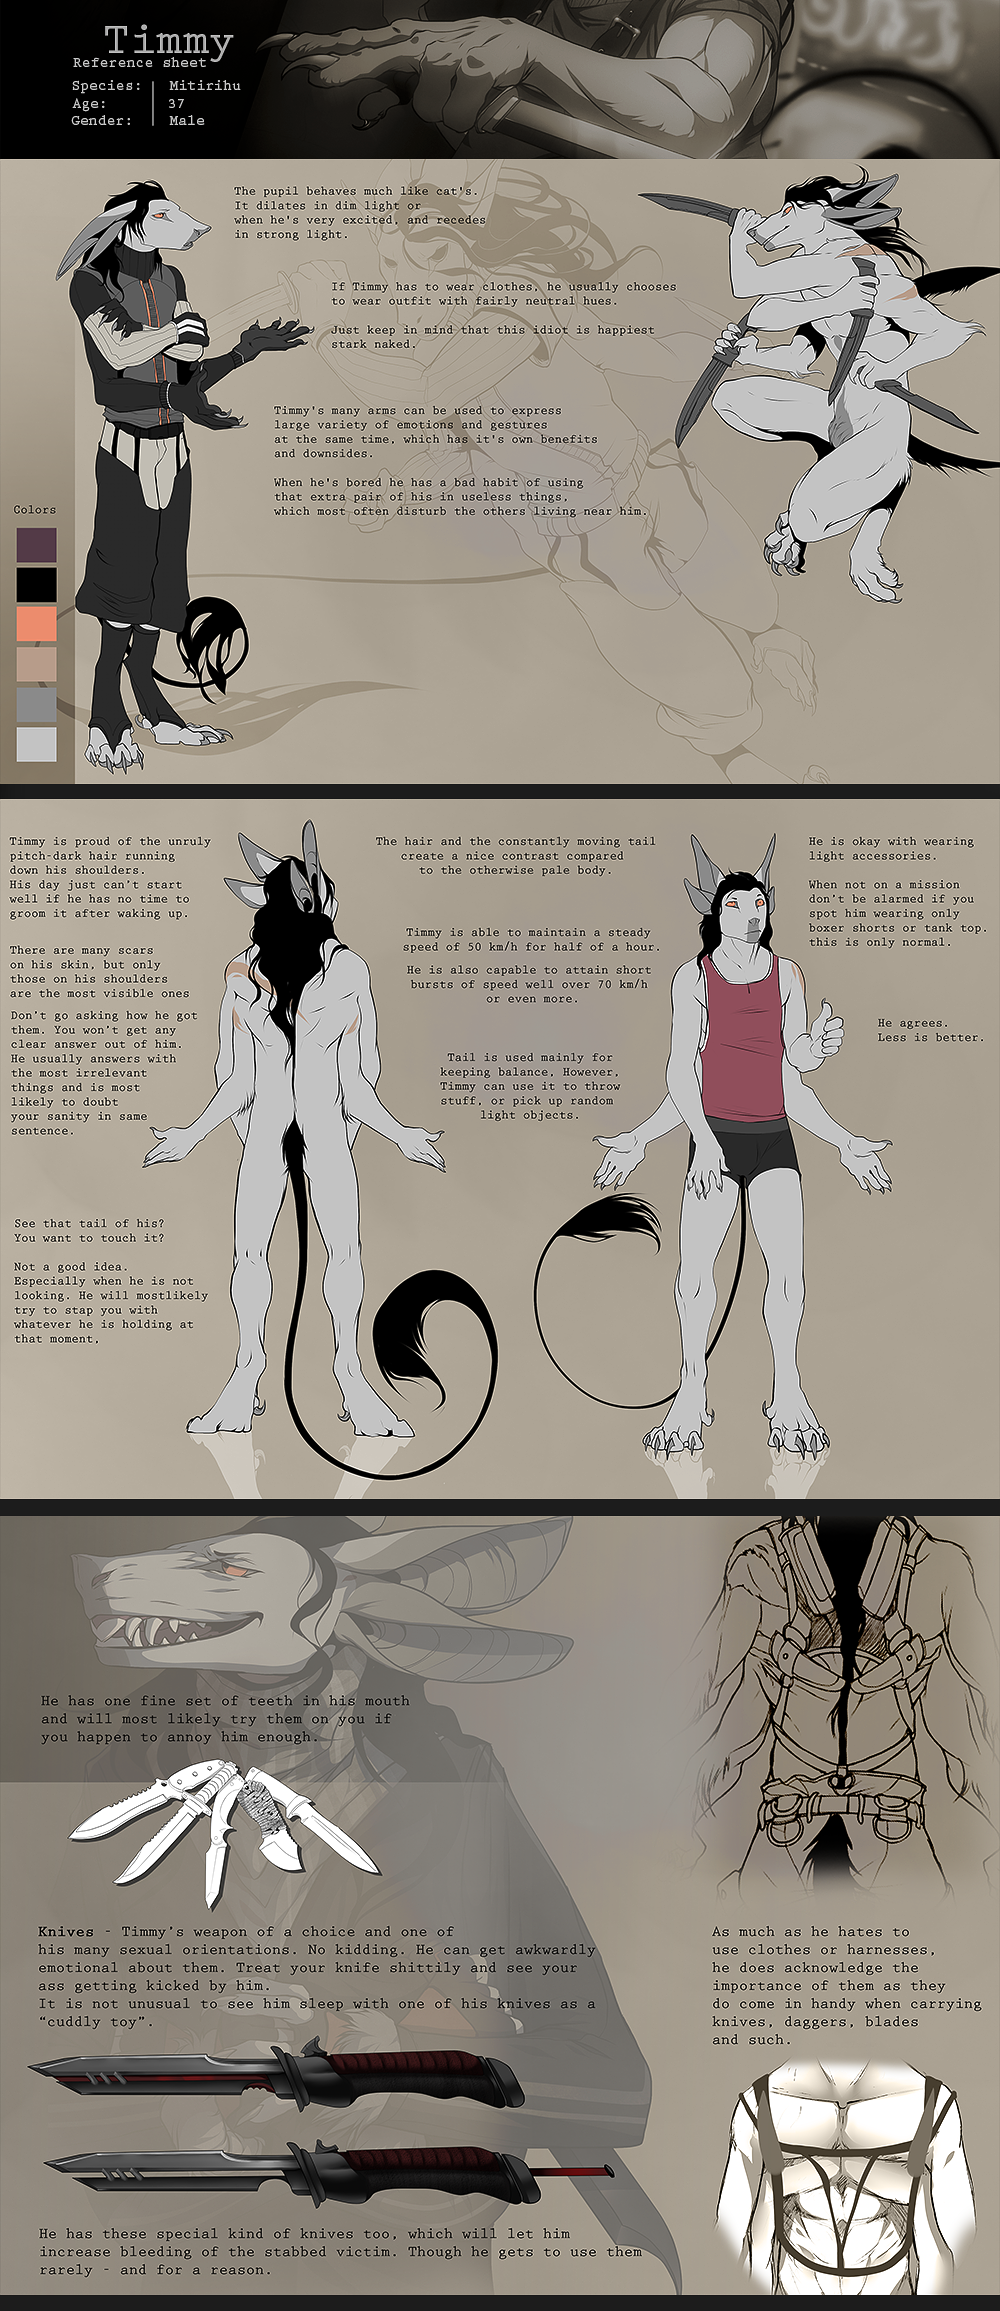 timmy___reference_sheet_by_grypwolf-d804